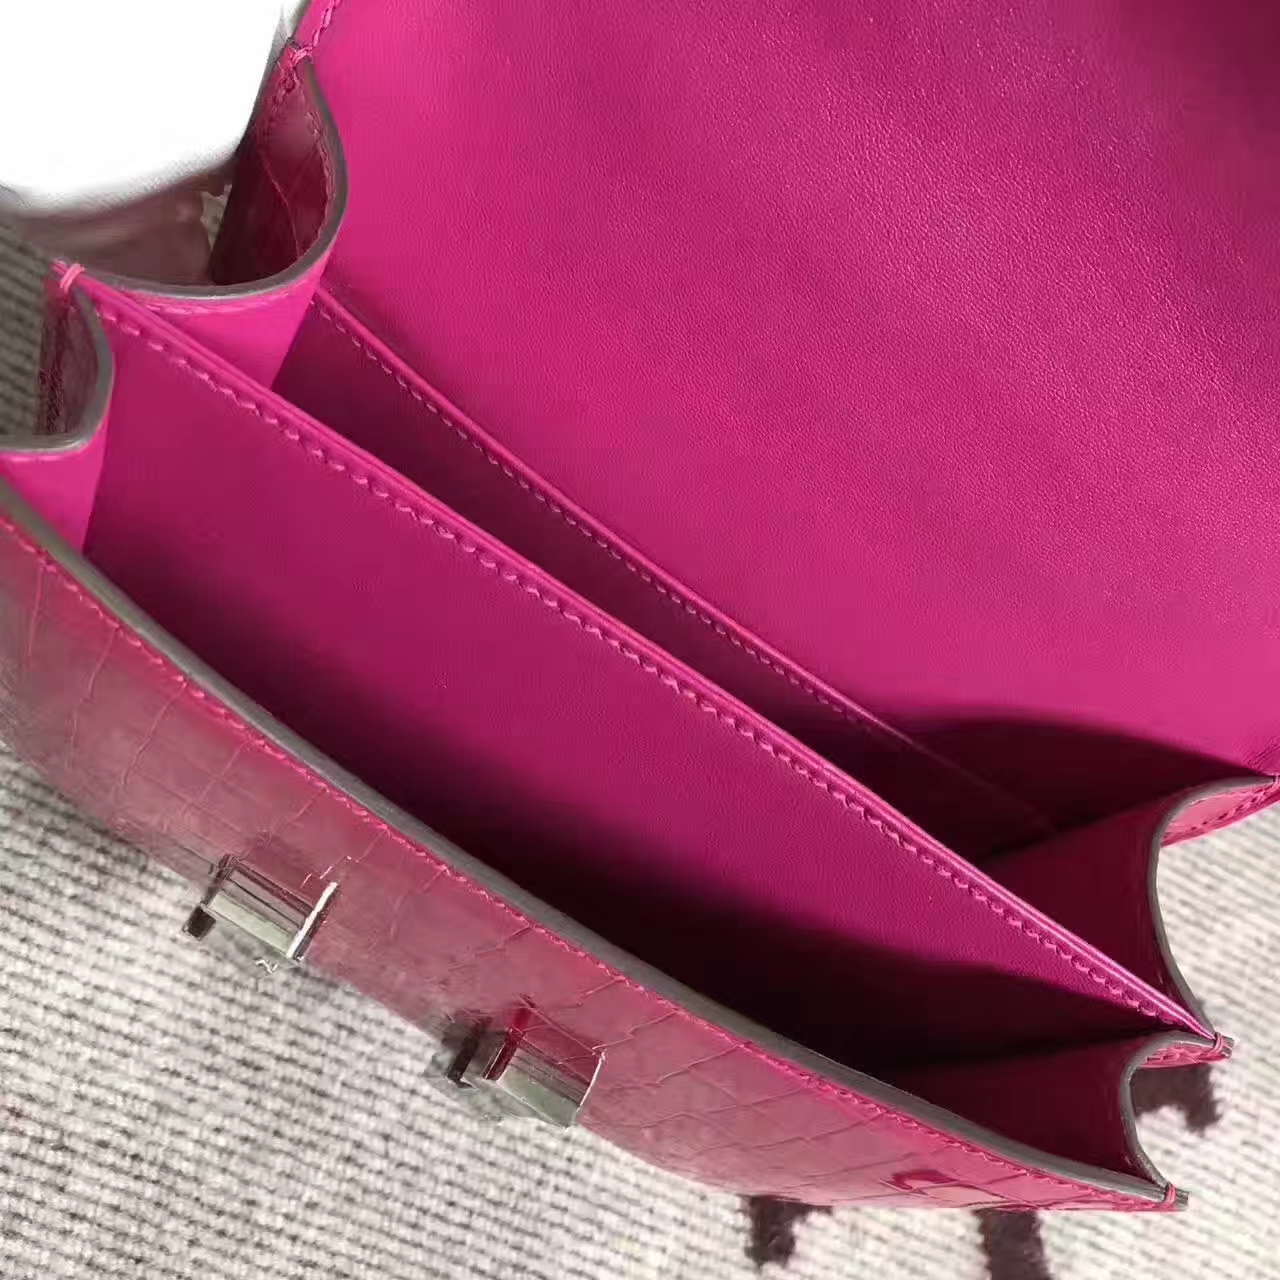 New Arrival Hermes Hot Pink Crocodile Shiny Leather Constance Bag19cm